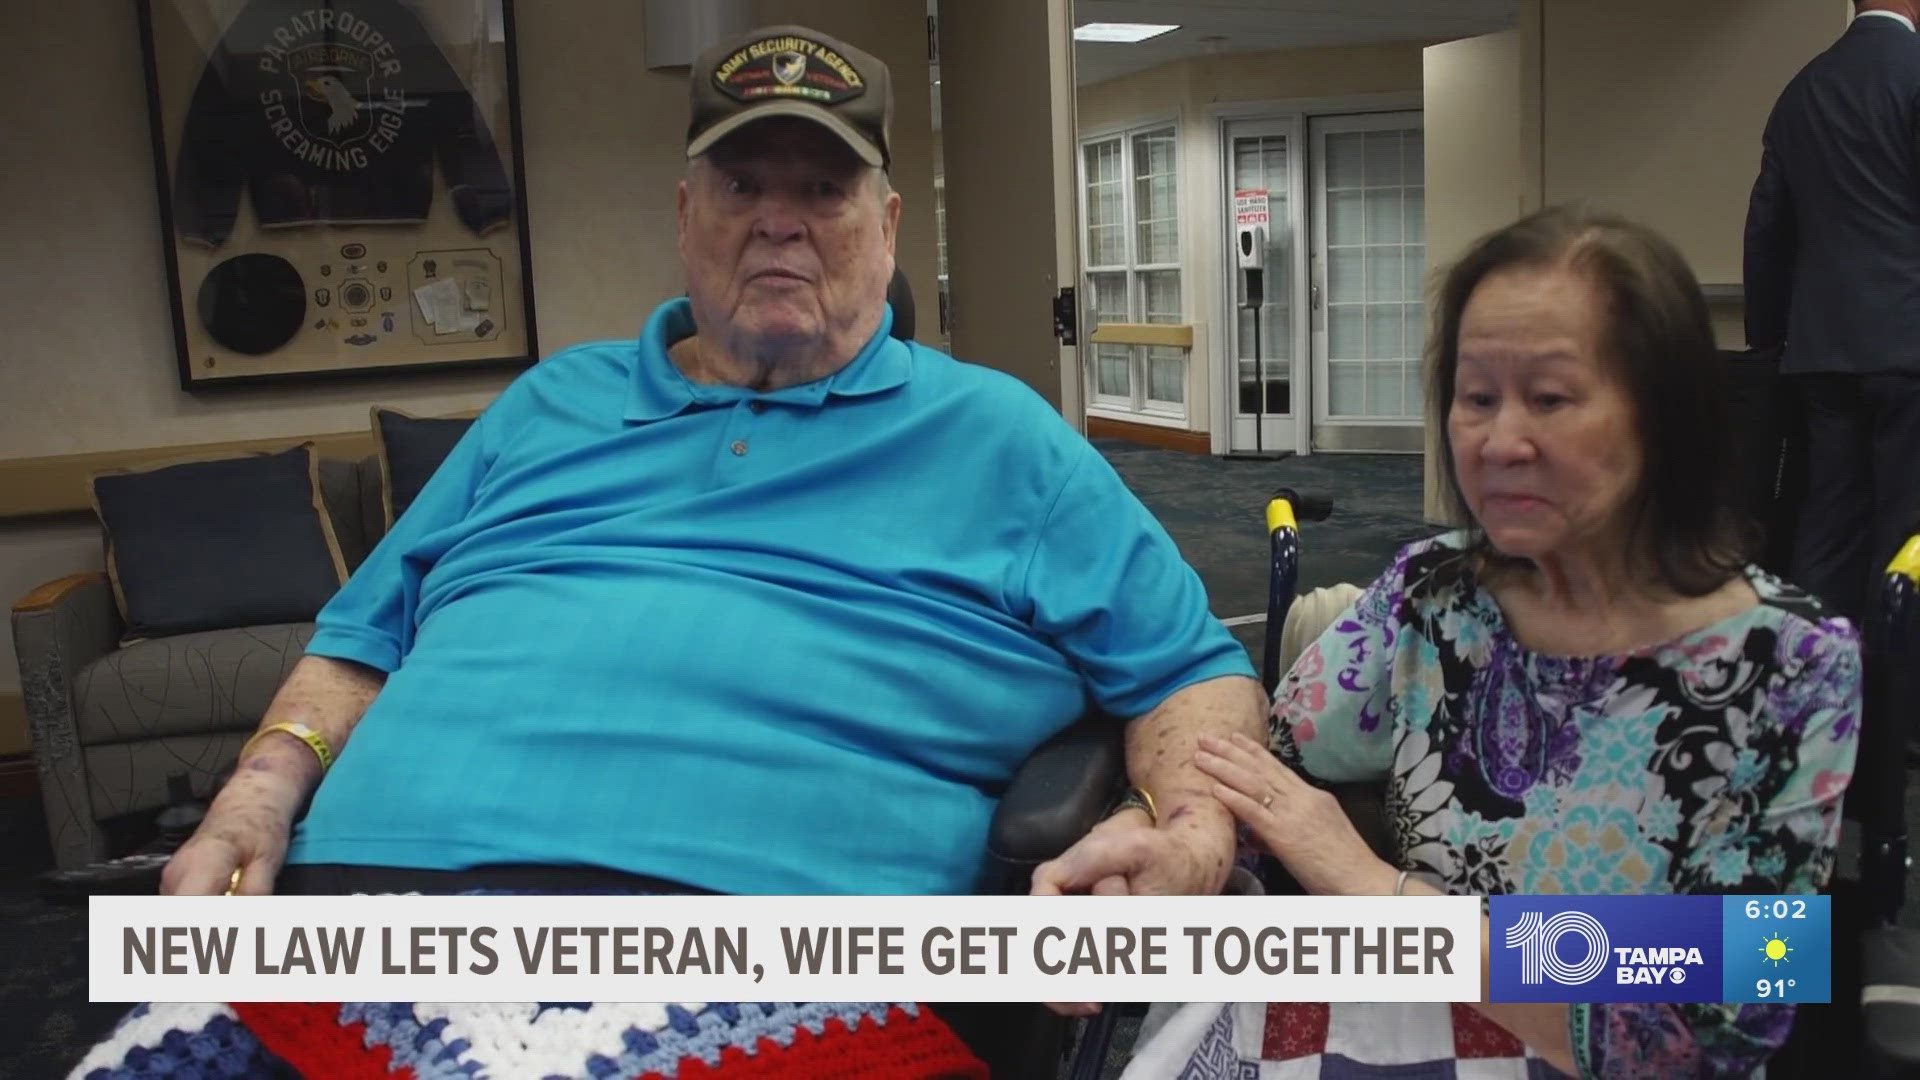 A new law signed by Gov. Ron DeSantis on Thursday will allow veteran spouses to be admitted and receive care at state veterans’ nursing homes.